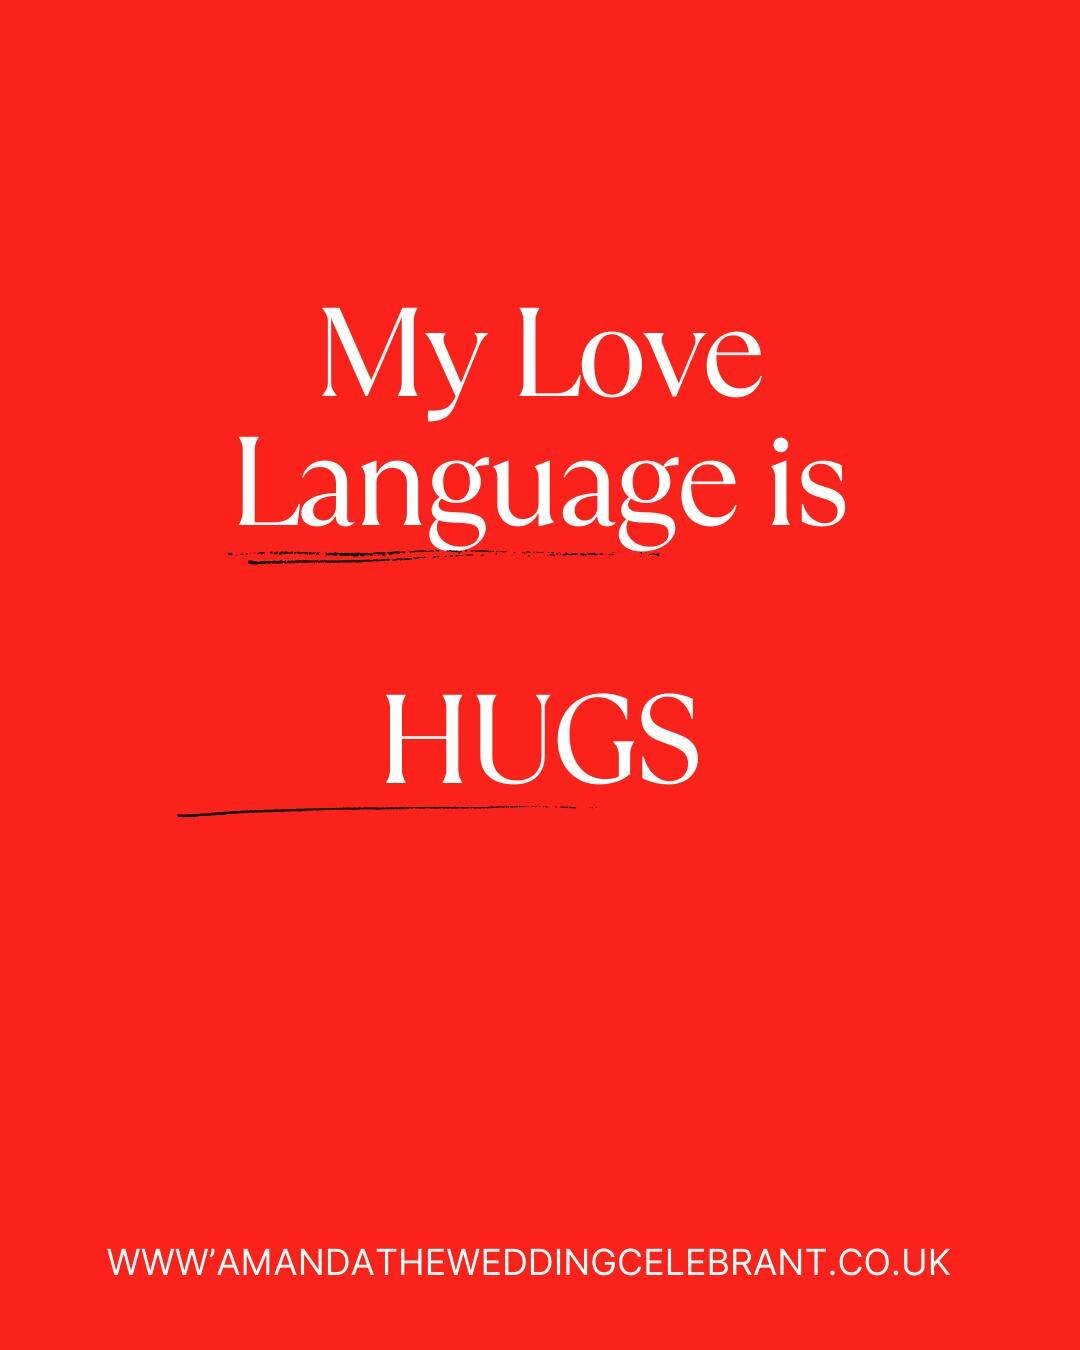 Do you know your Love Language?

A decade or more ago I first discovered Love Languages.
There is a book The Five Love Languages by Gary Chapman and a very cool Love Languages test you do on line...just type in Love Languages Quiz to see which Love L